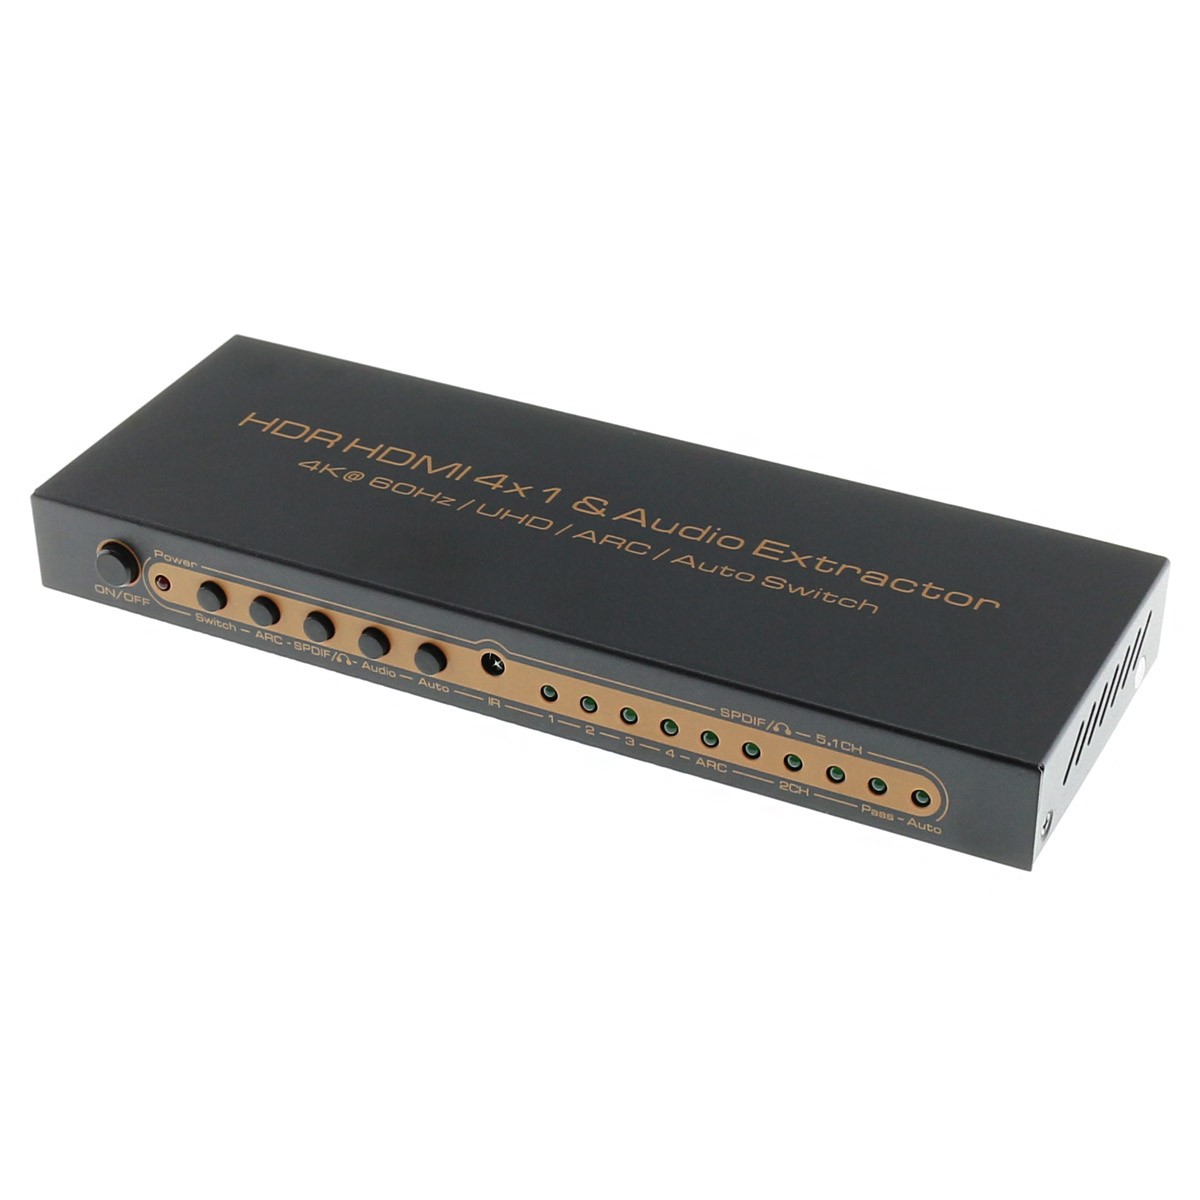 Audio Extractor HDMI 5.1 to HDMI / Optical / Jack HDCP2.2 HDR 4K 60Hz ARC